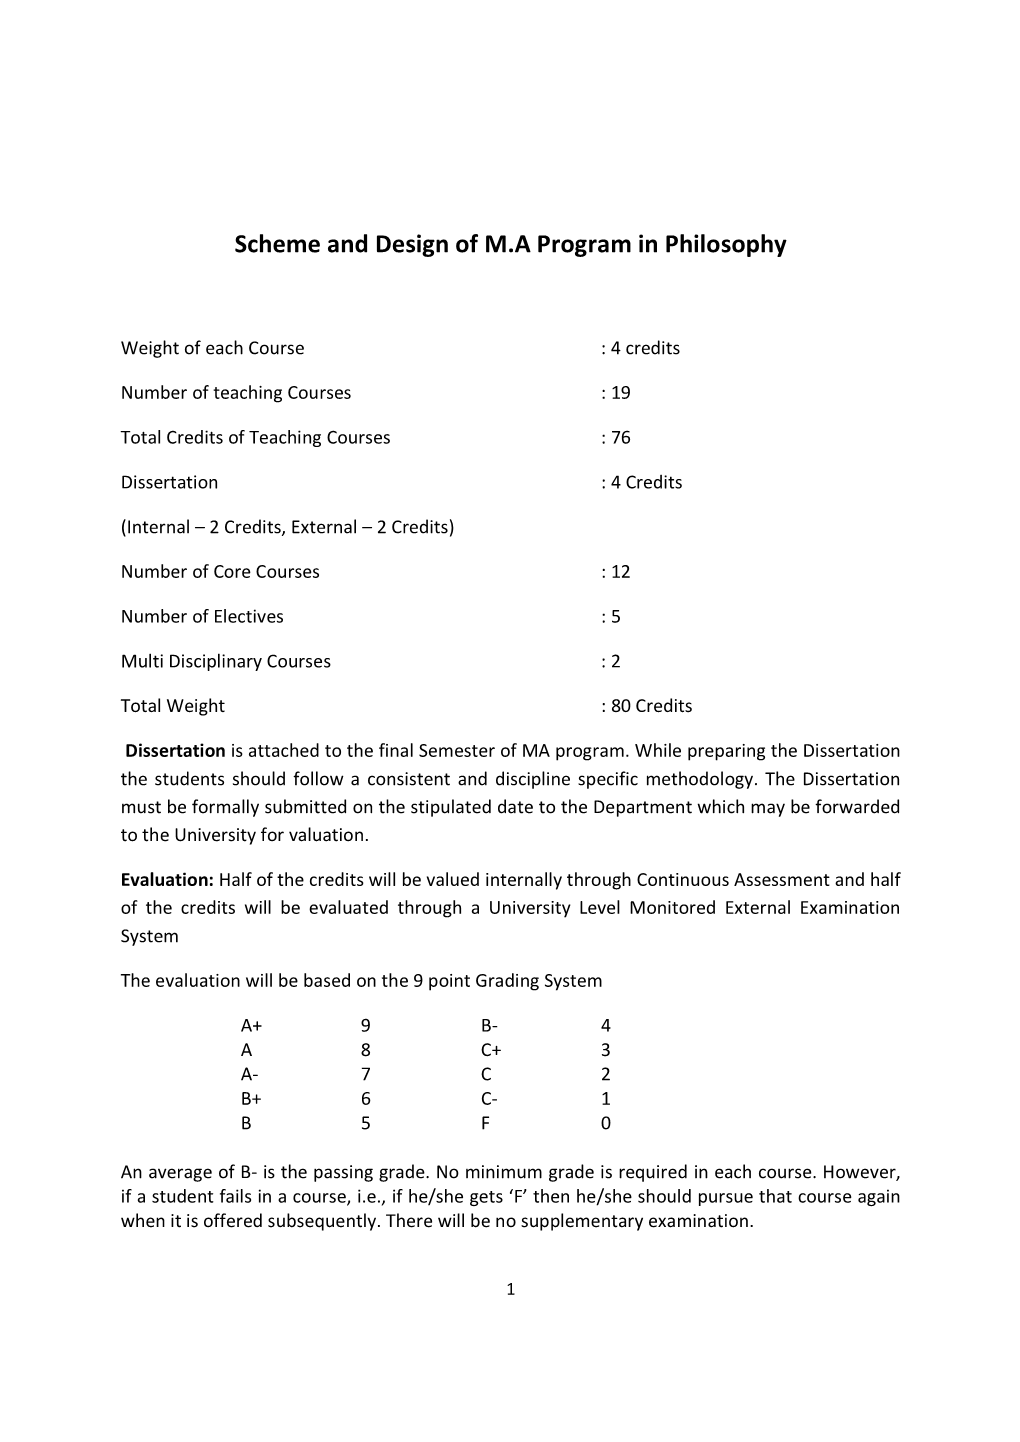 Scheme and Design of M.A Program in Philosophy